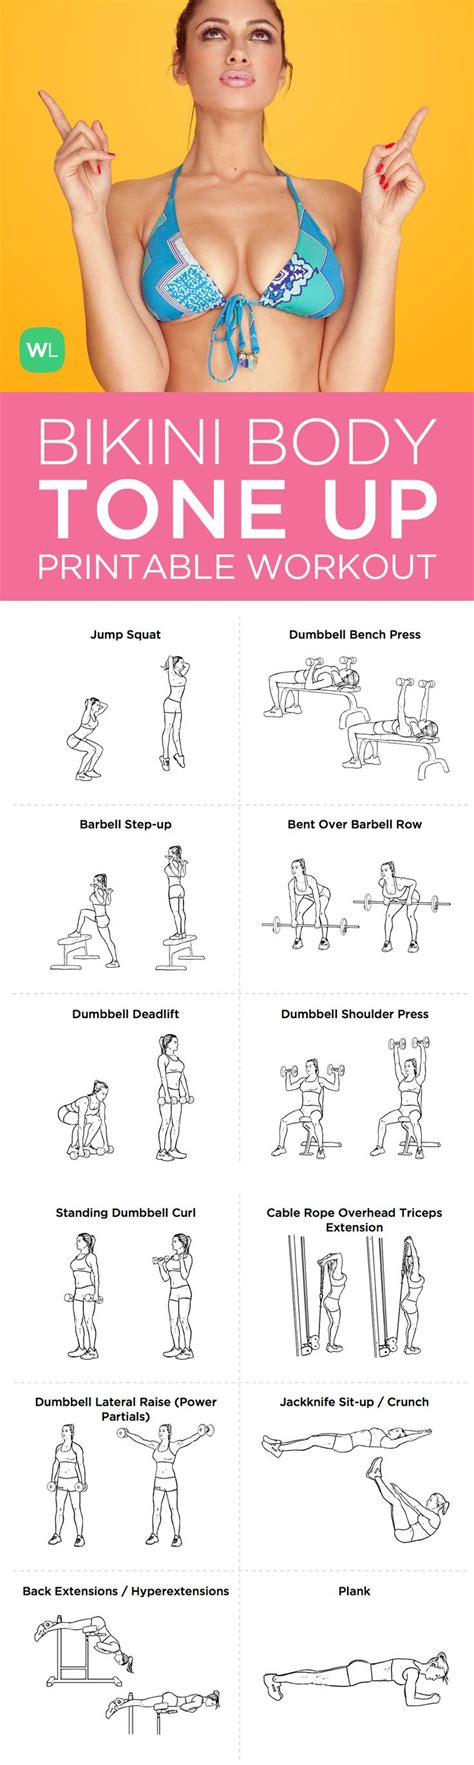 For men excess calories are stored as fat, beginning with the waist and abdominal areas first. 9 Best Images of Printable Workout Plans - Printable ...